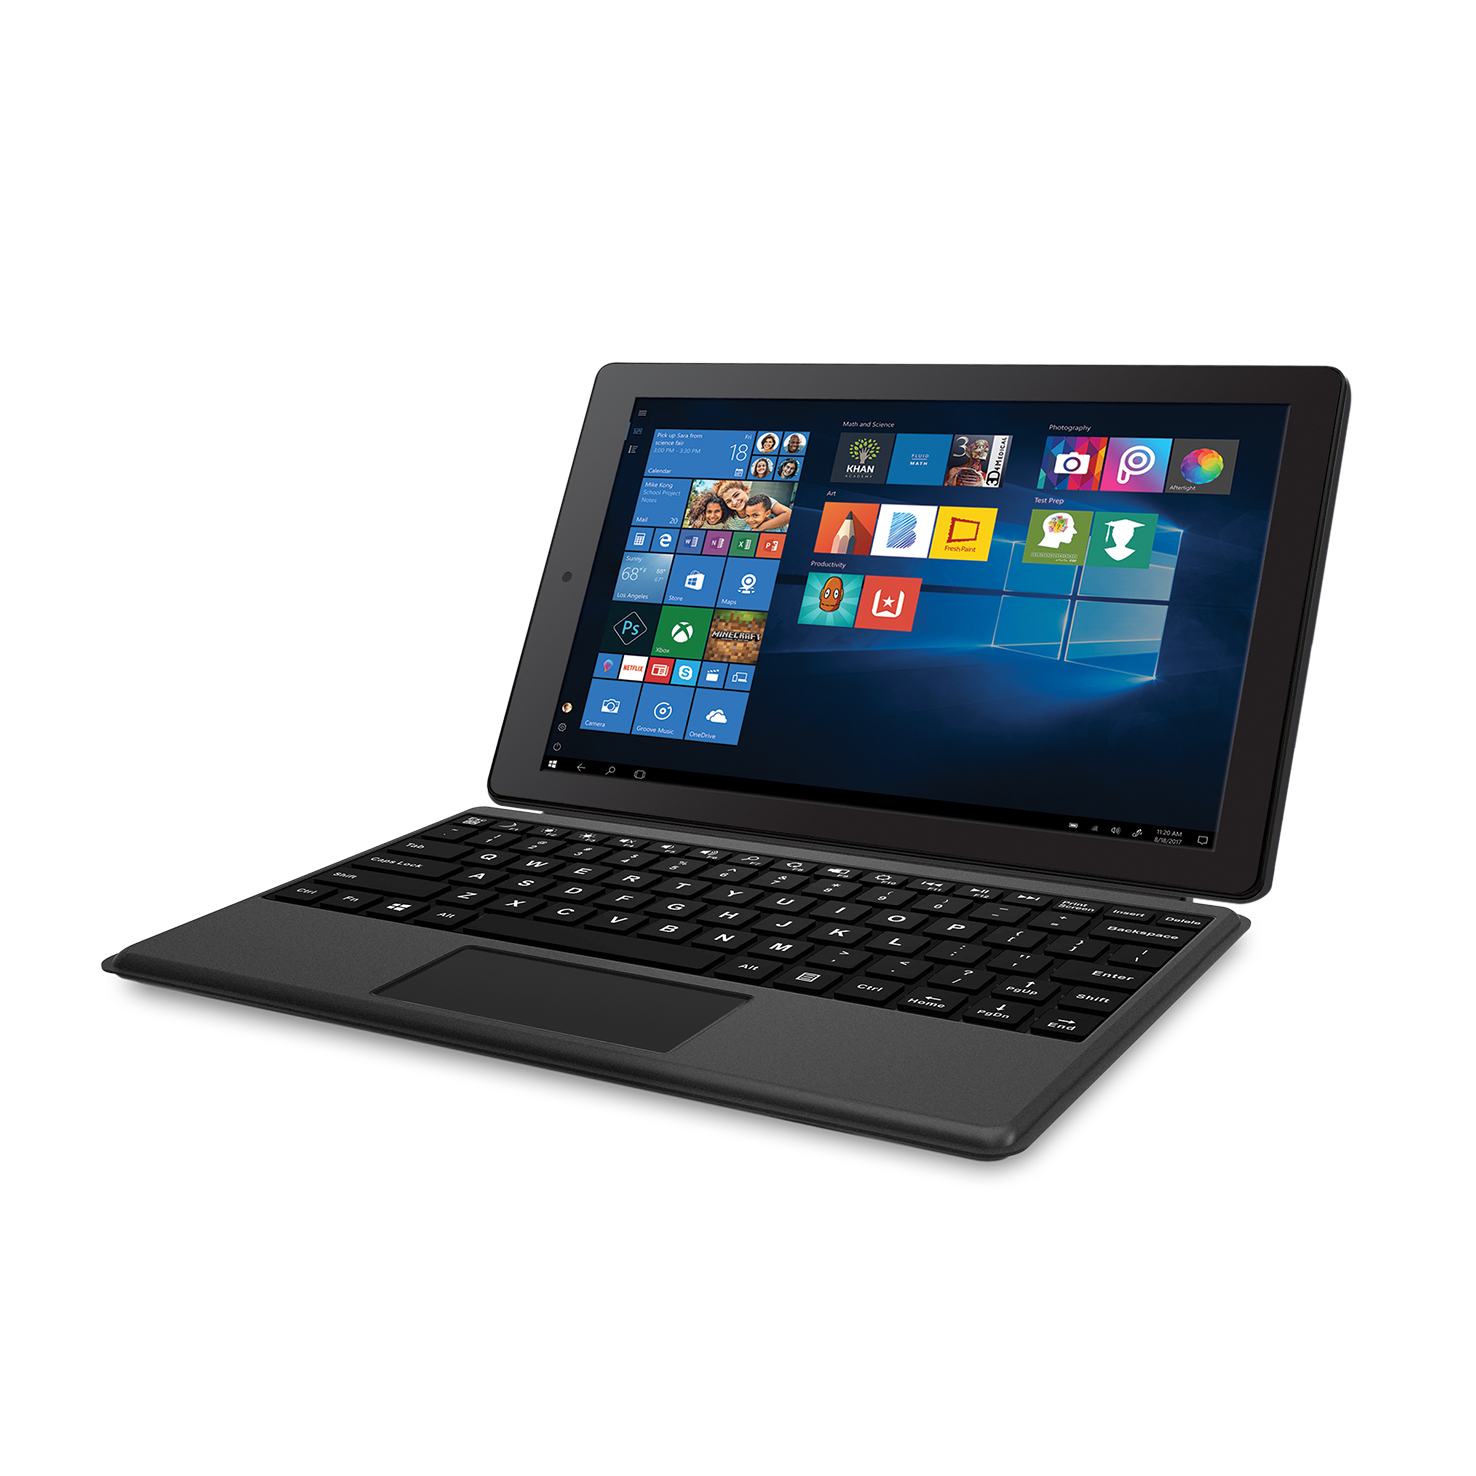 RCA Cambio 10.1" (2-in-1) Windows Tablet & Keyboard, Charcoal - image 2 of 9